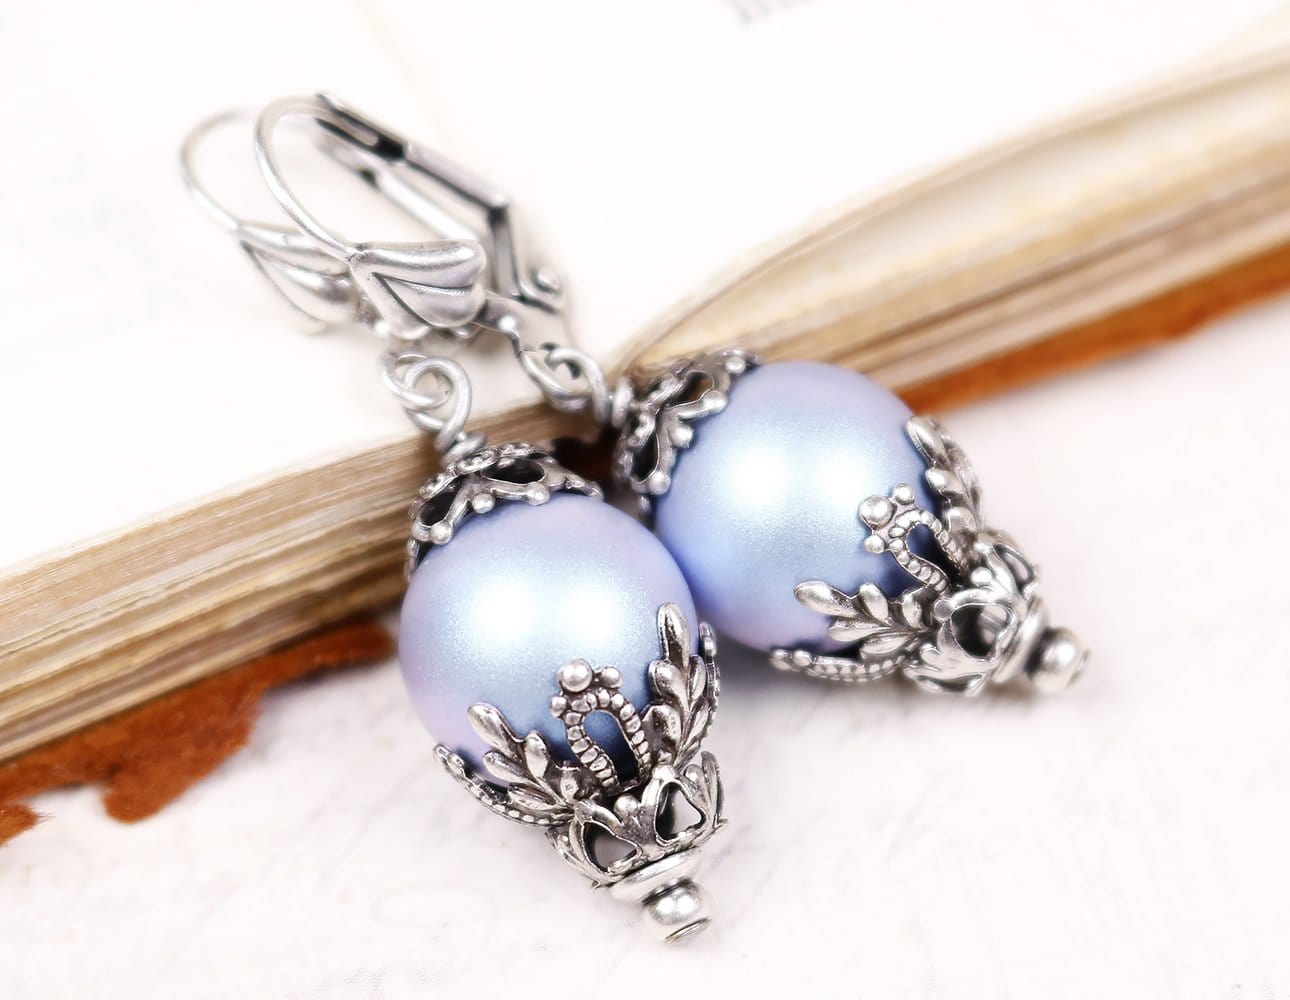 Borgia Earrings in Iridescent Light Blue Pearl and Antiqued Silver by Rabbitwood and Reason